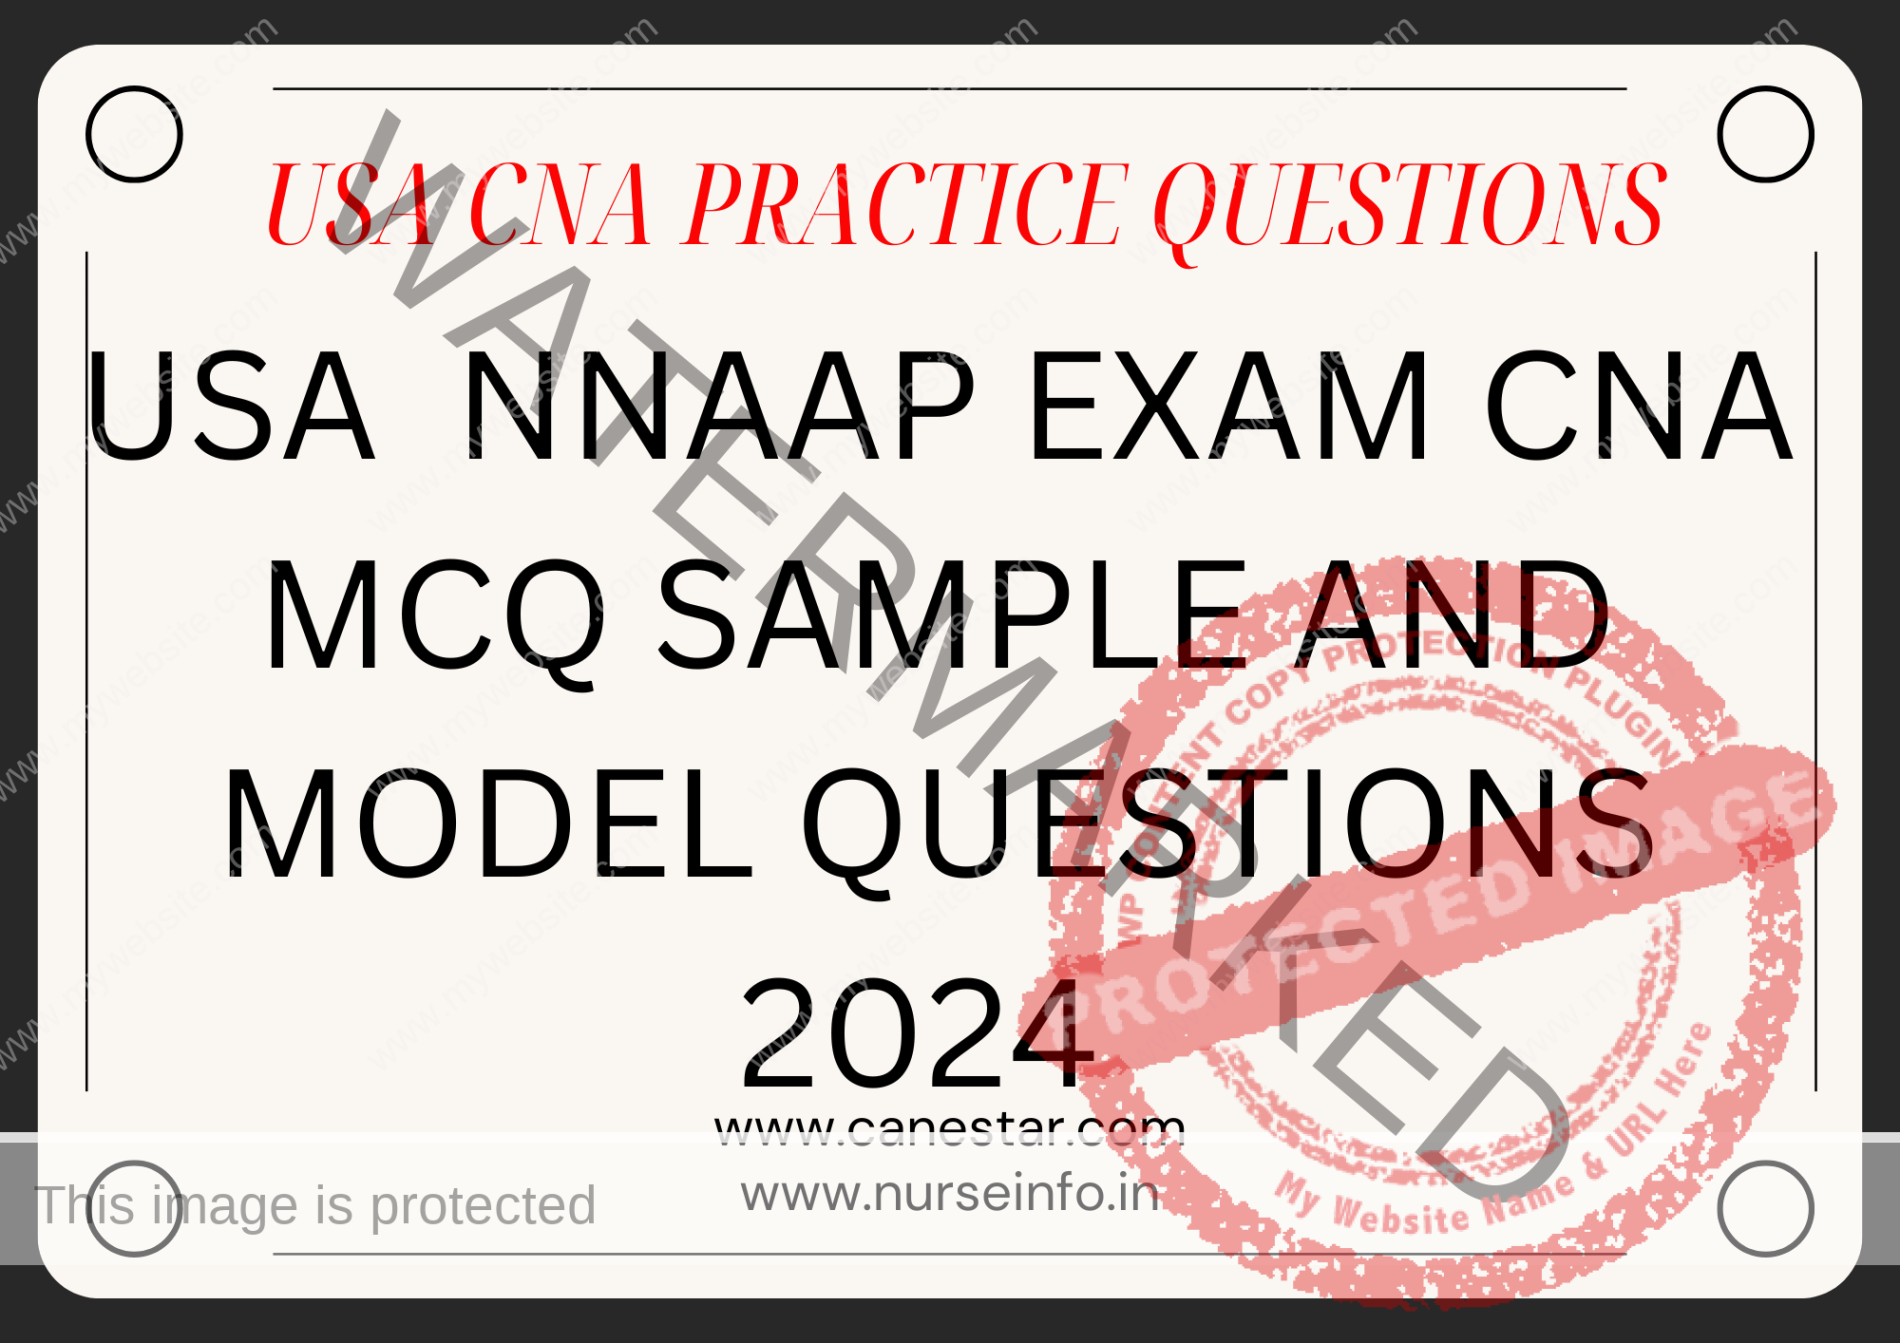 USA CNA PRACTICE QUESTIONS AND ANSWERS NNAAP Written Examination USA CNA MCQ MODEL AND SAMPLE QUESTIONS